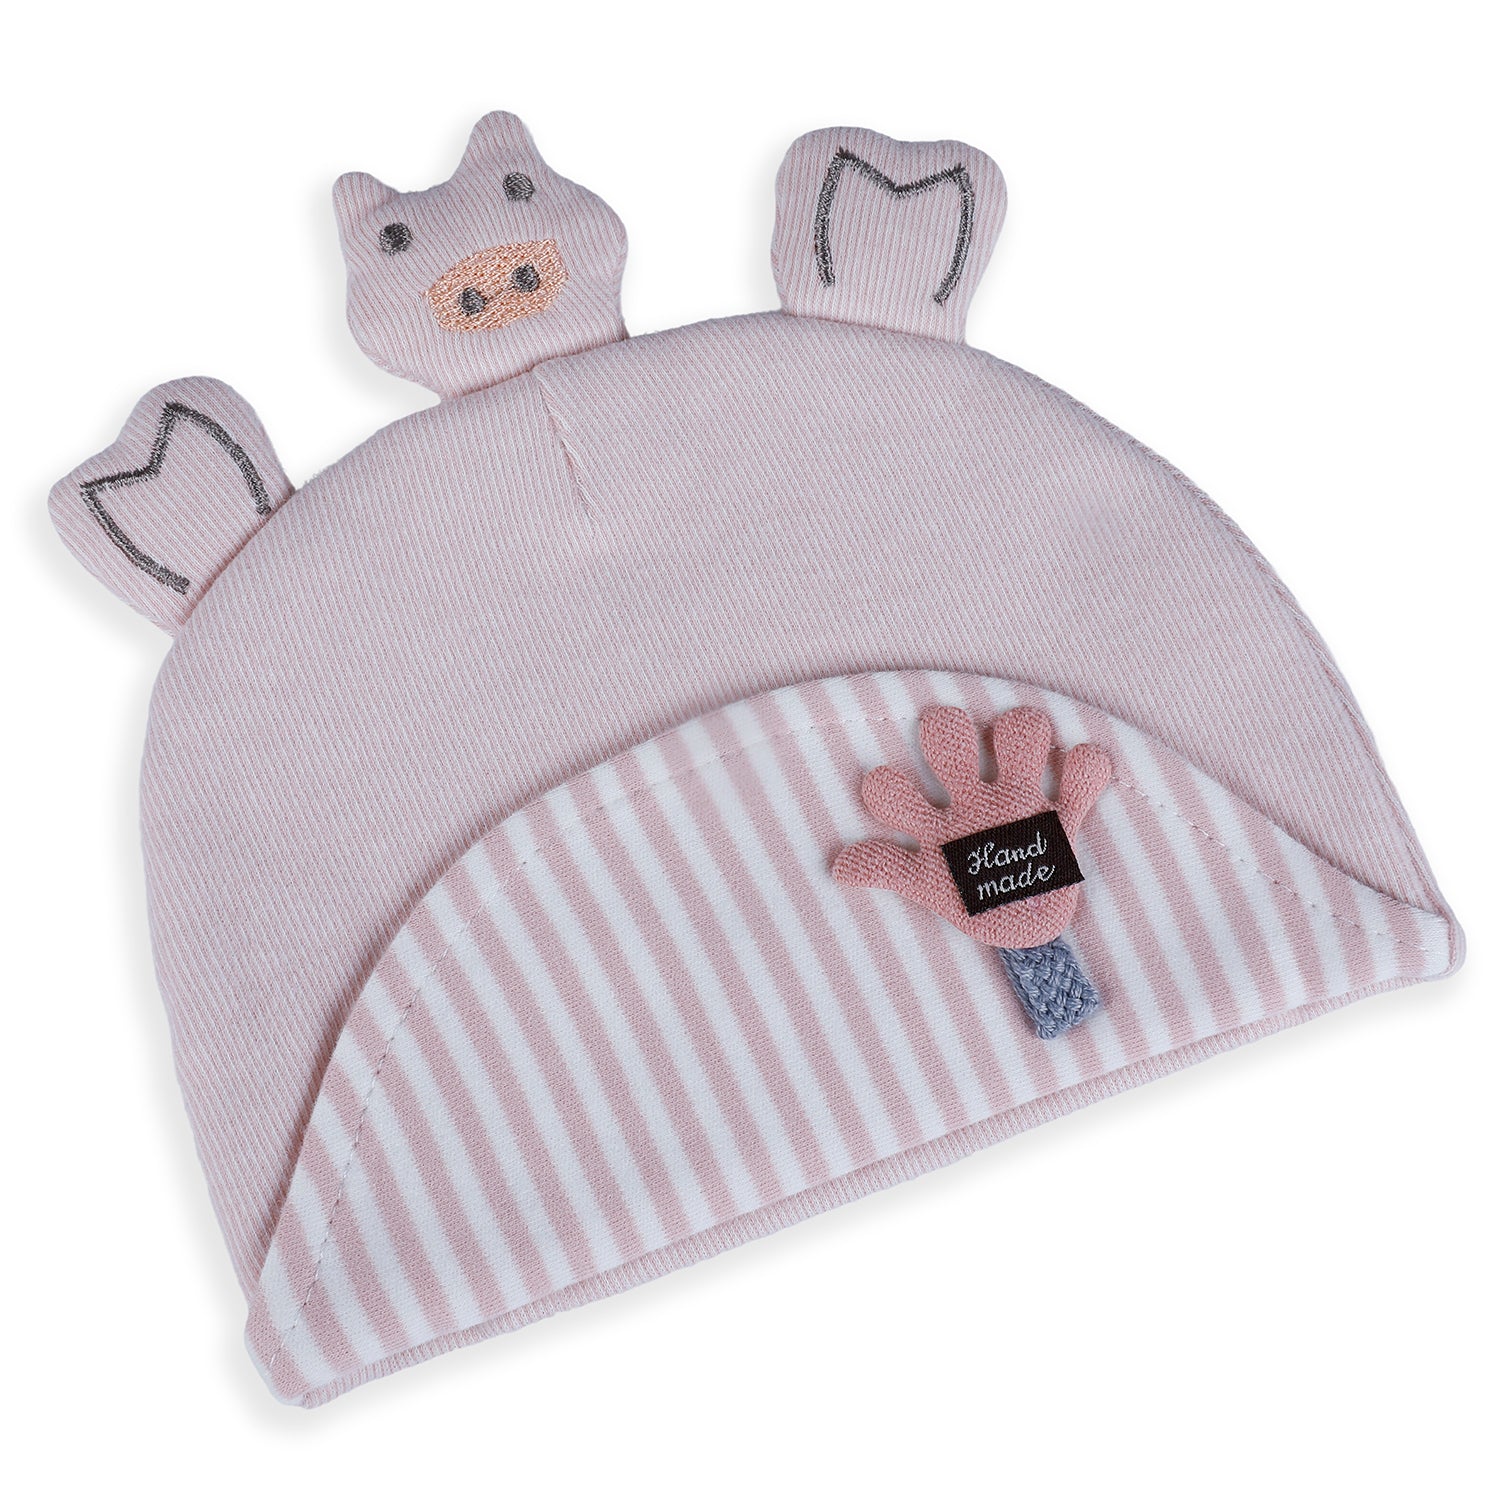 Baby Moo Cute Turtle Toddlers Cotton Cap - Pink - Baby Moo